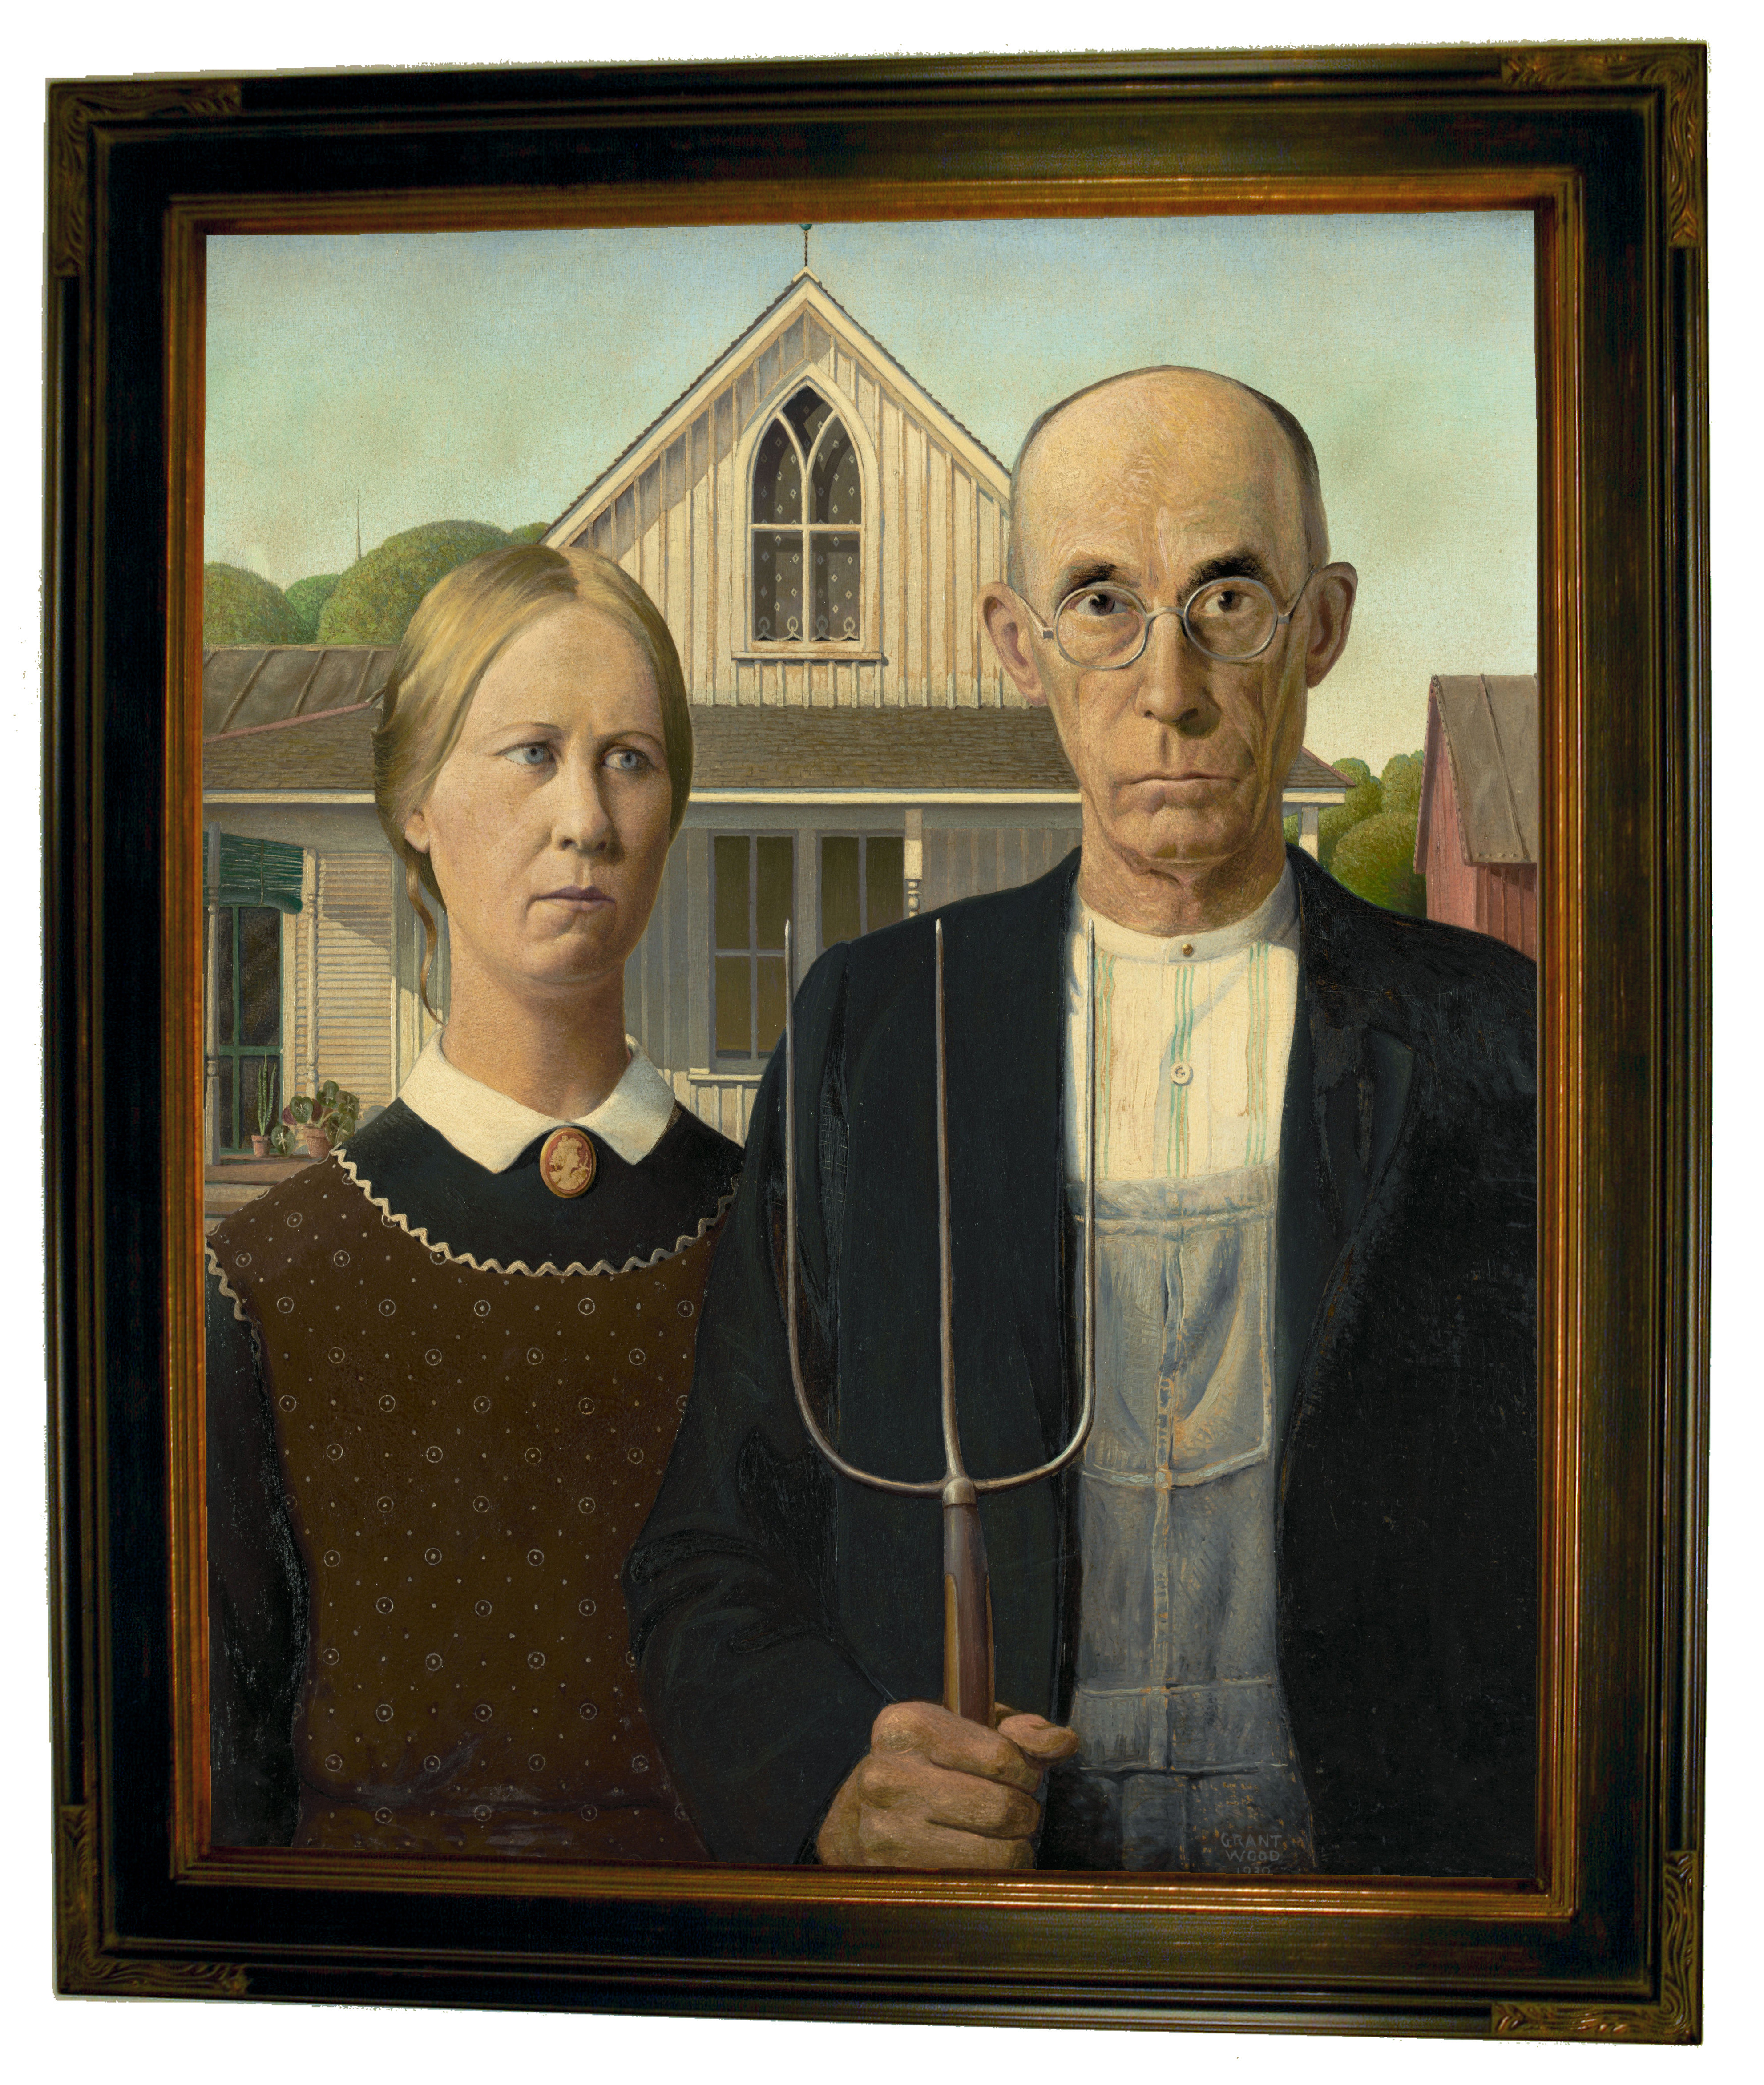 American Gothic by Grant Wood - Print on Canvas